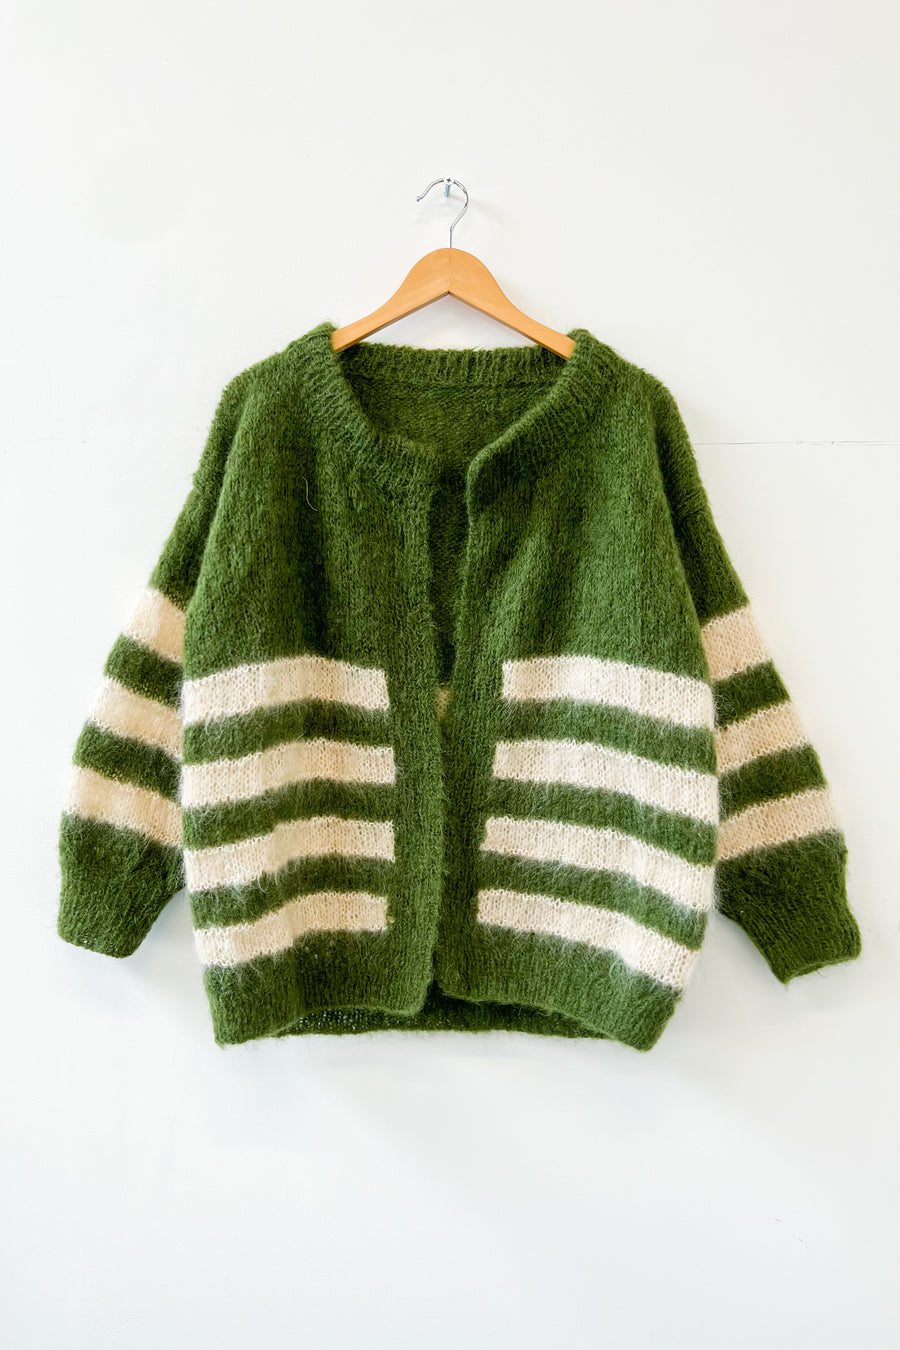 Vintage Stripe Hand Knitted Mohair Cardigan